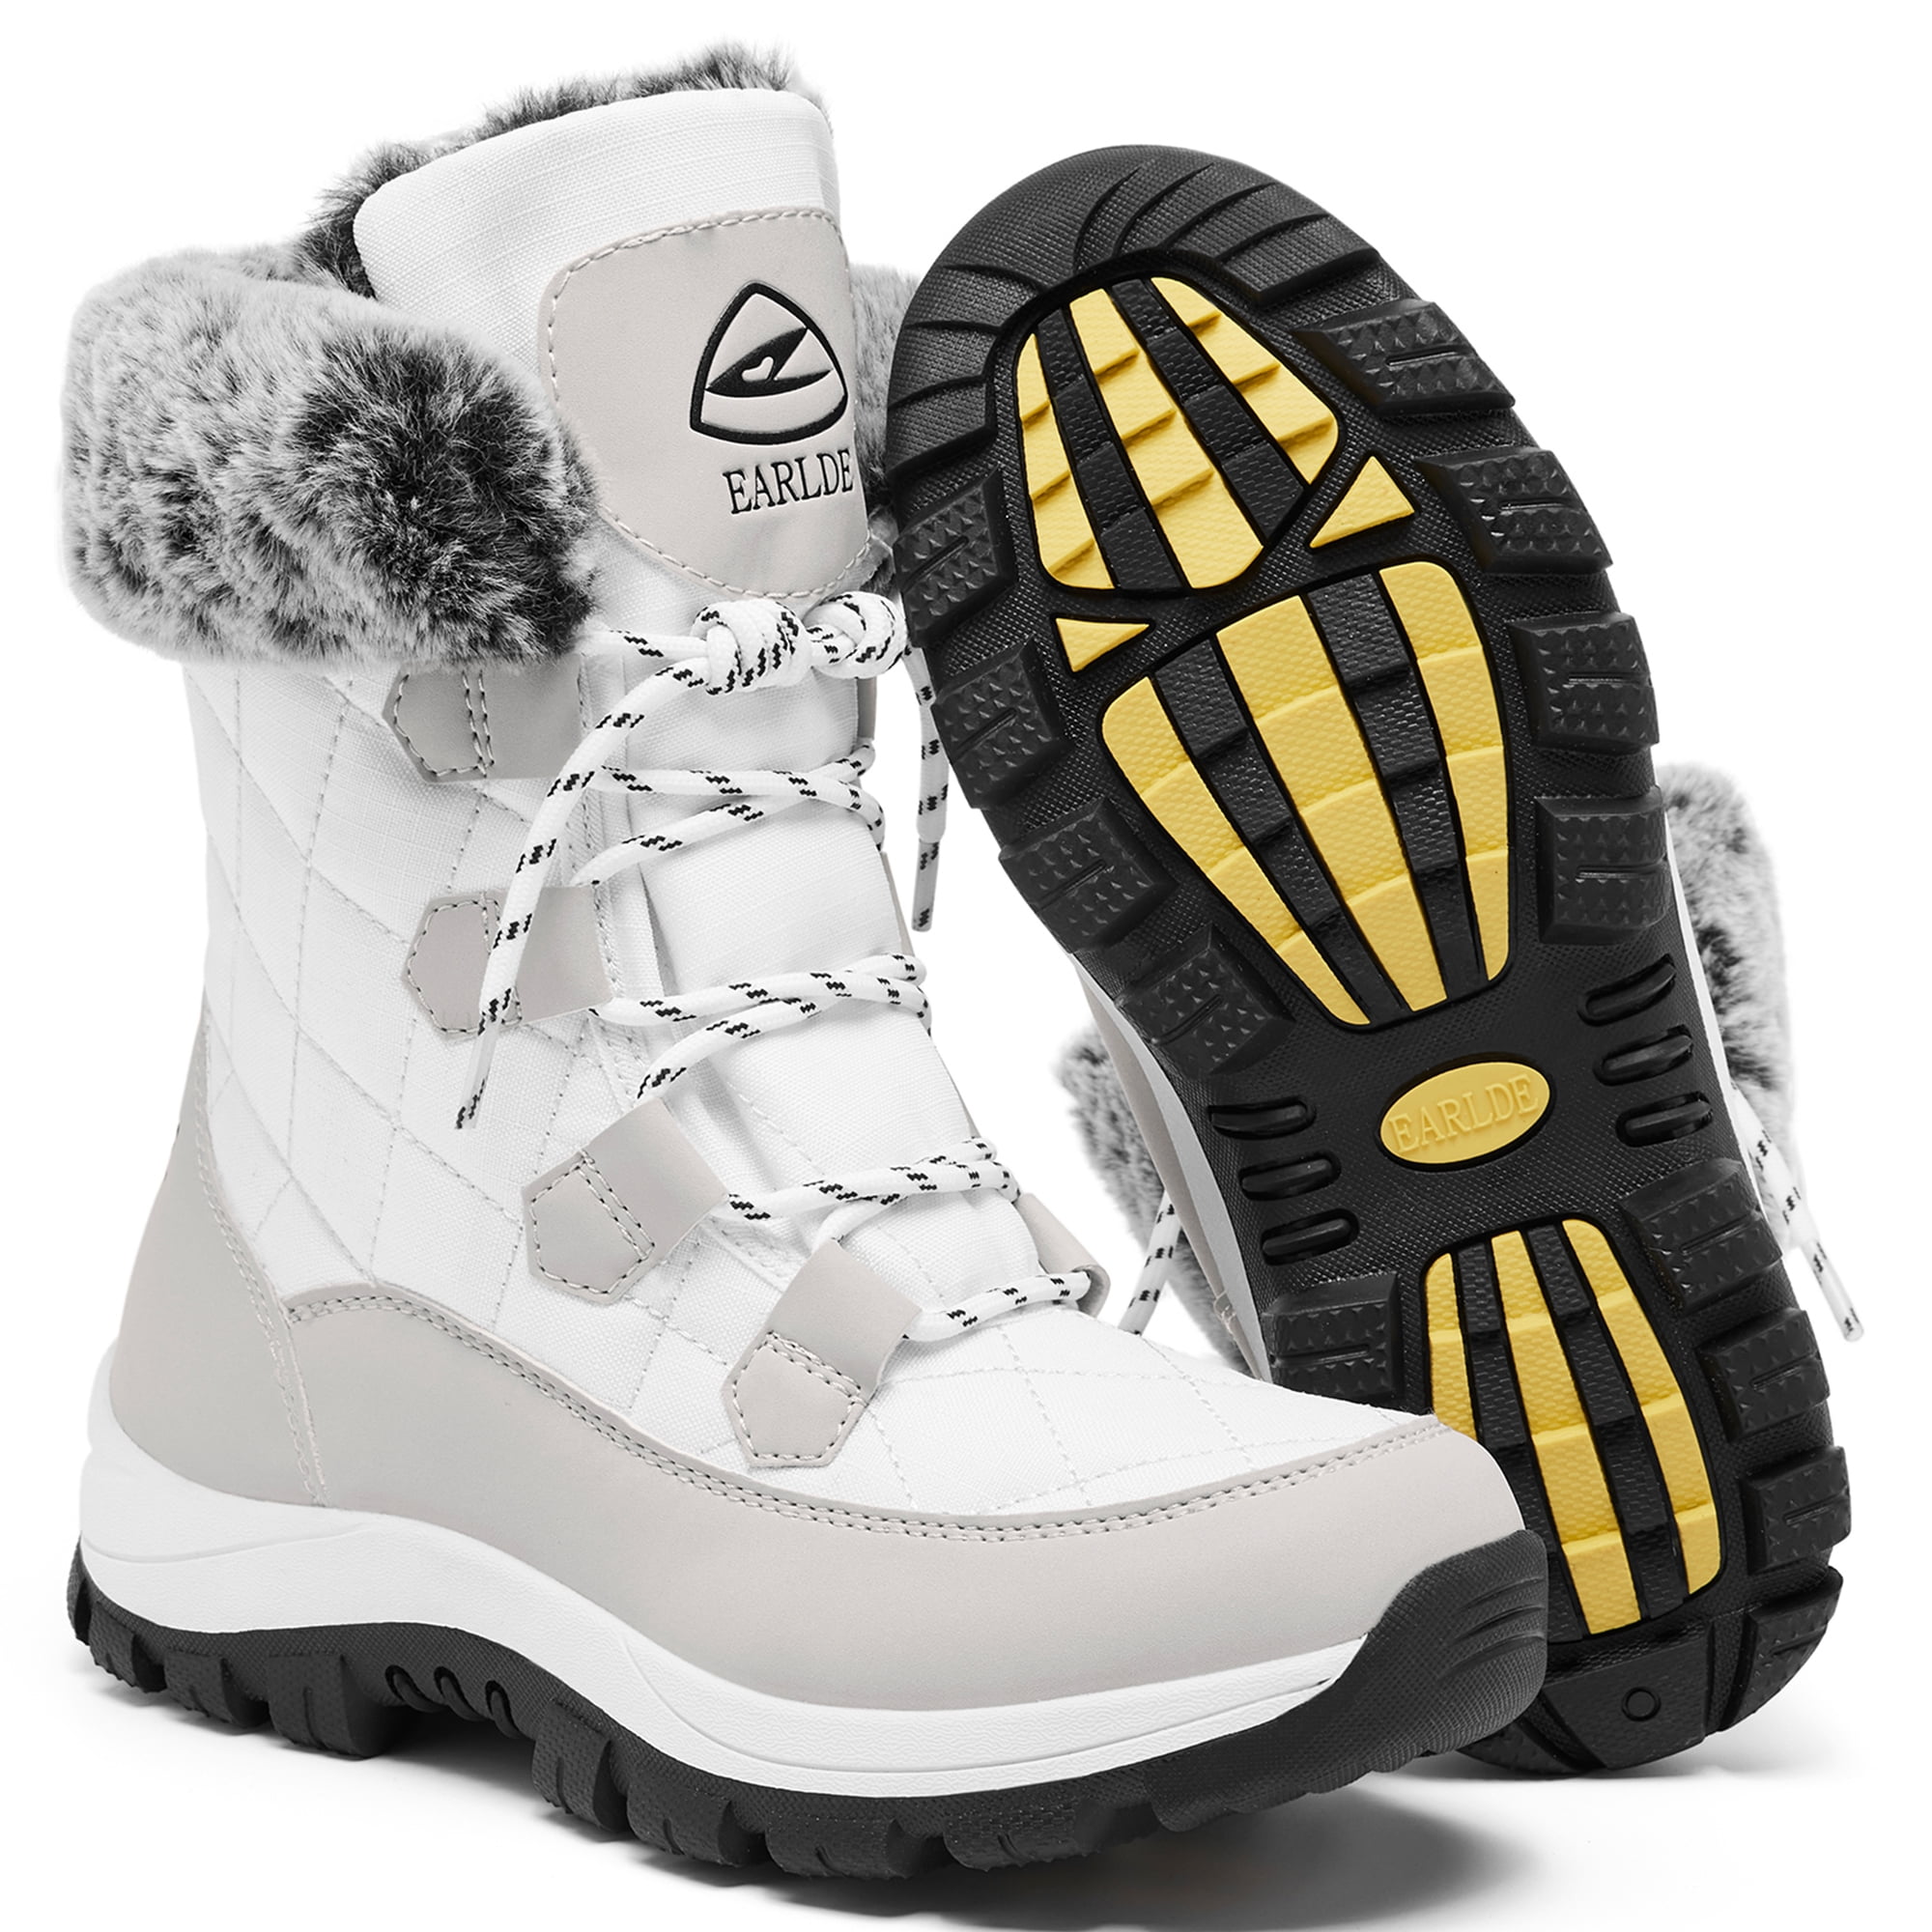 Women’s Snow Boot With Waterproof Lace Up Mid-Calf Outdoor Winter Deep ...